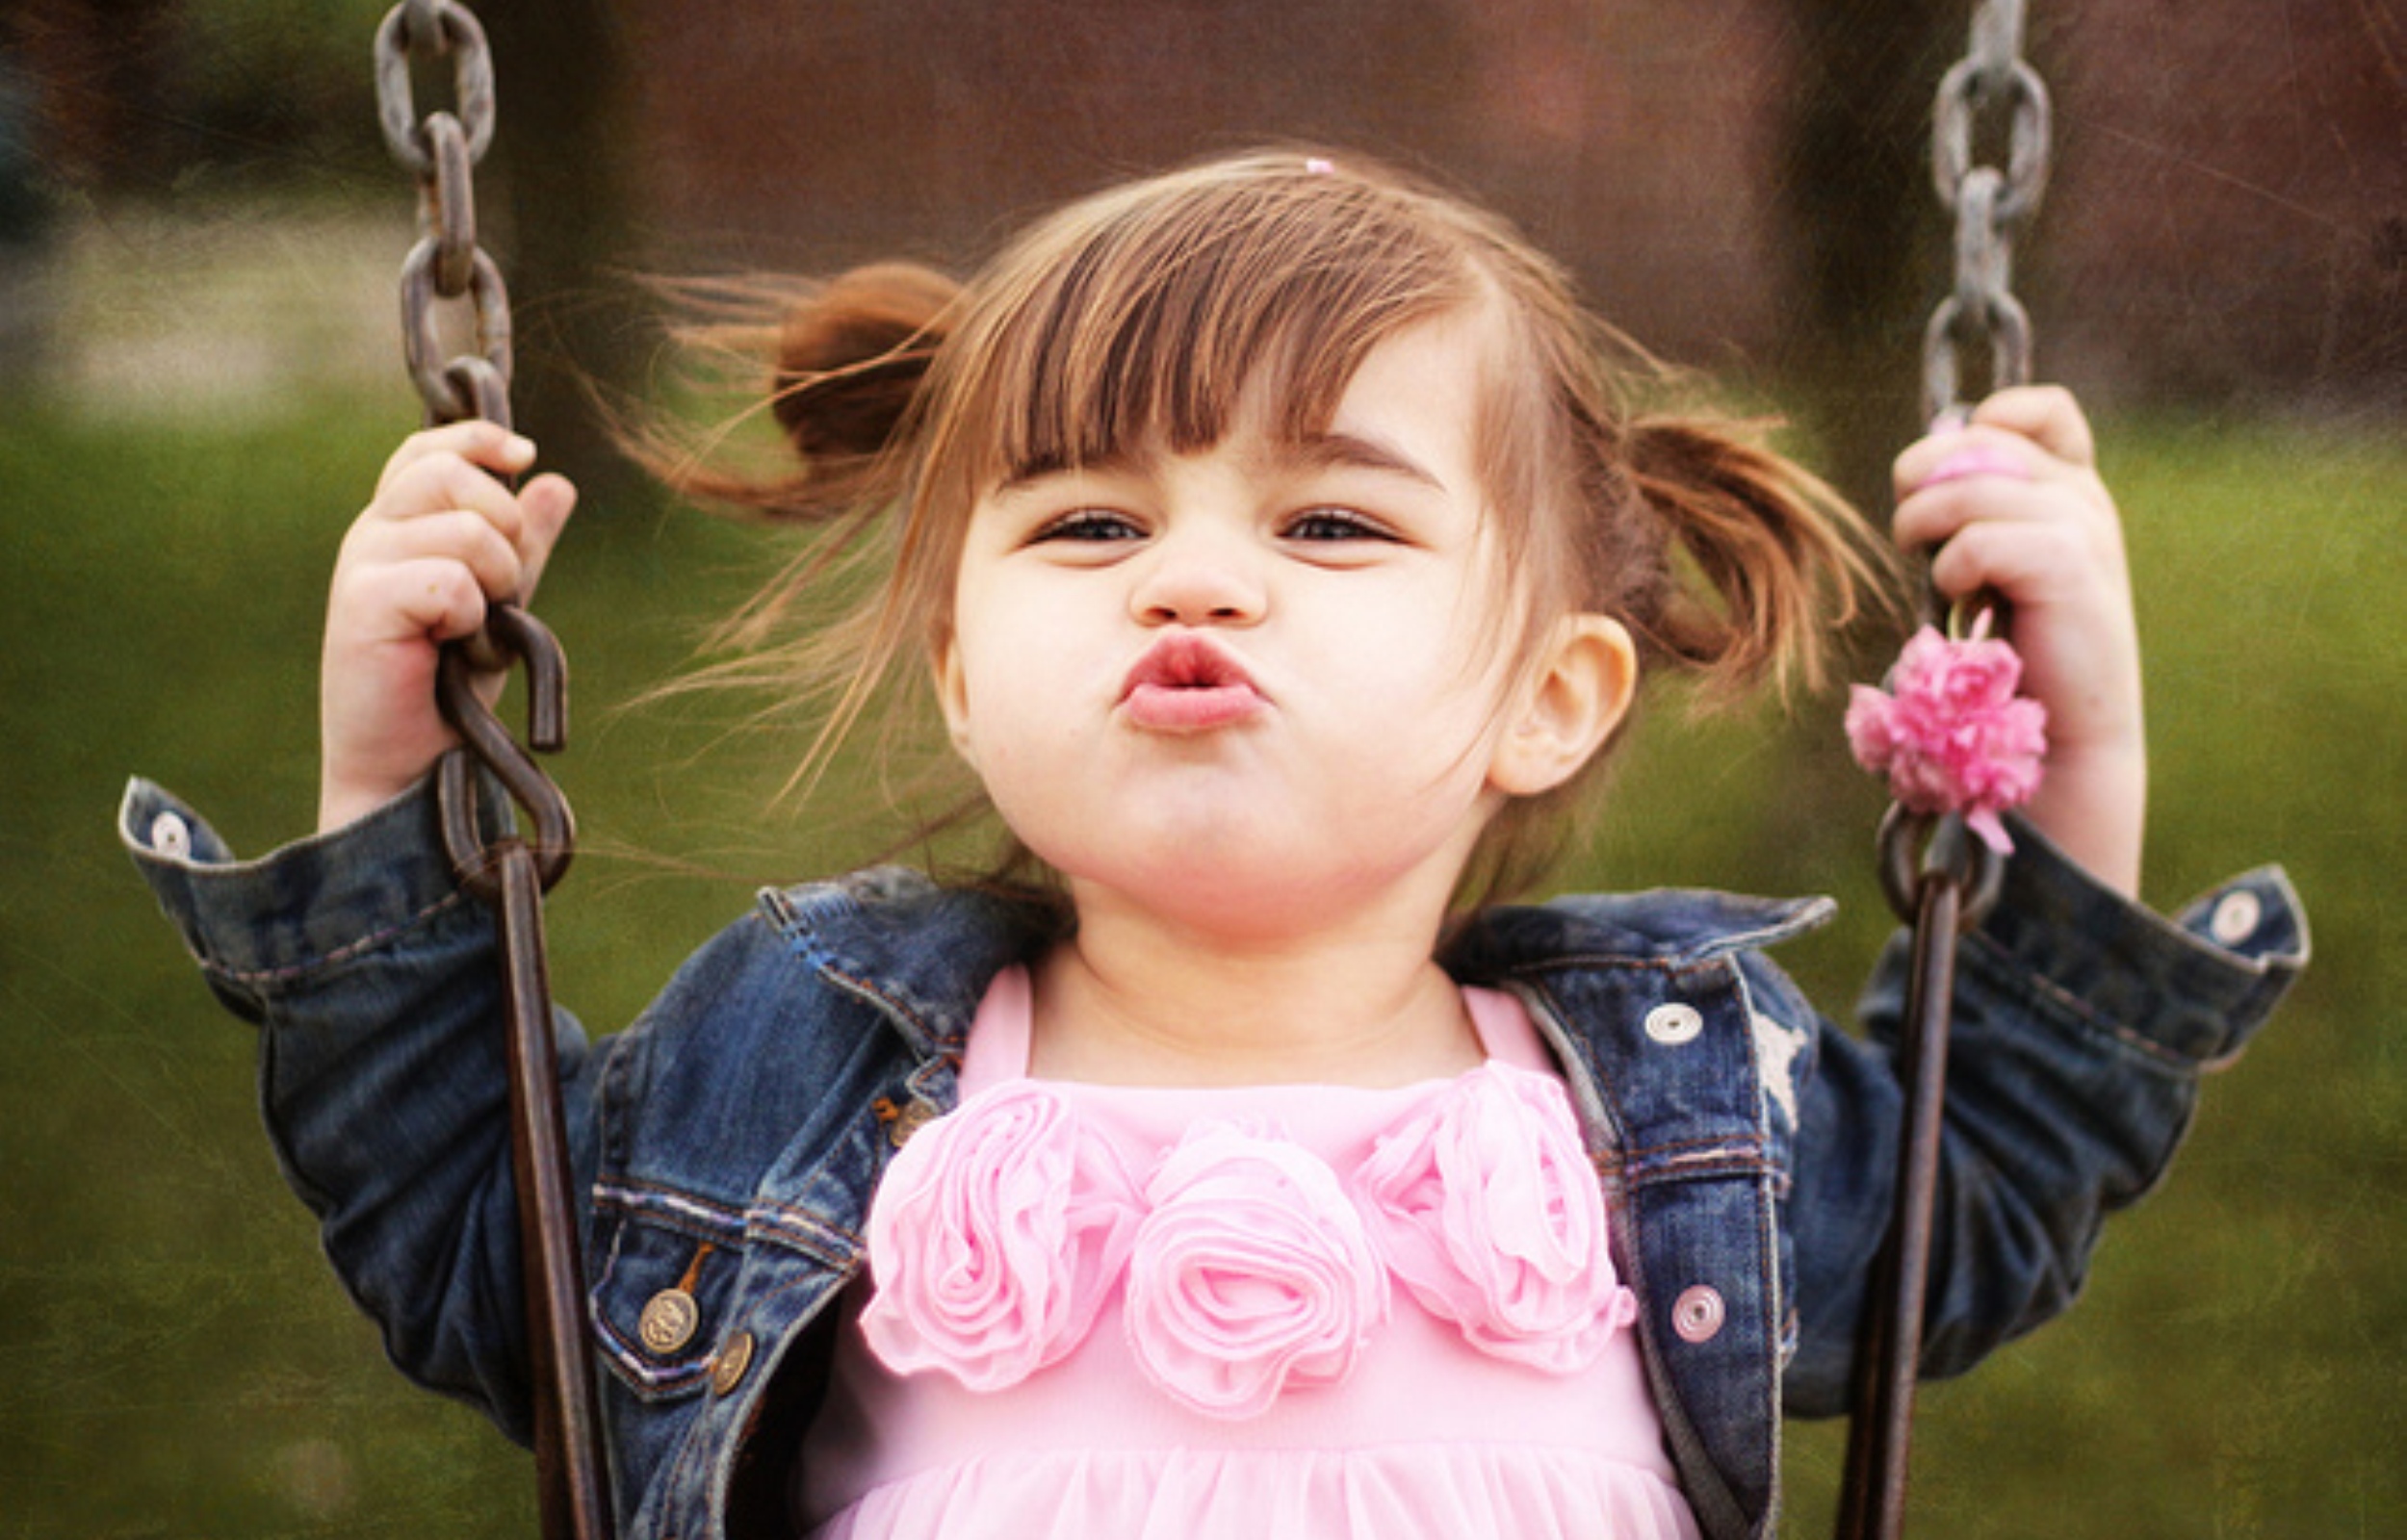 Little Girl Wallpapers | Little Girl Backgrounds and Images (32 ...